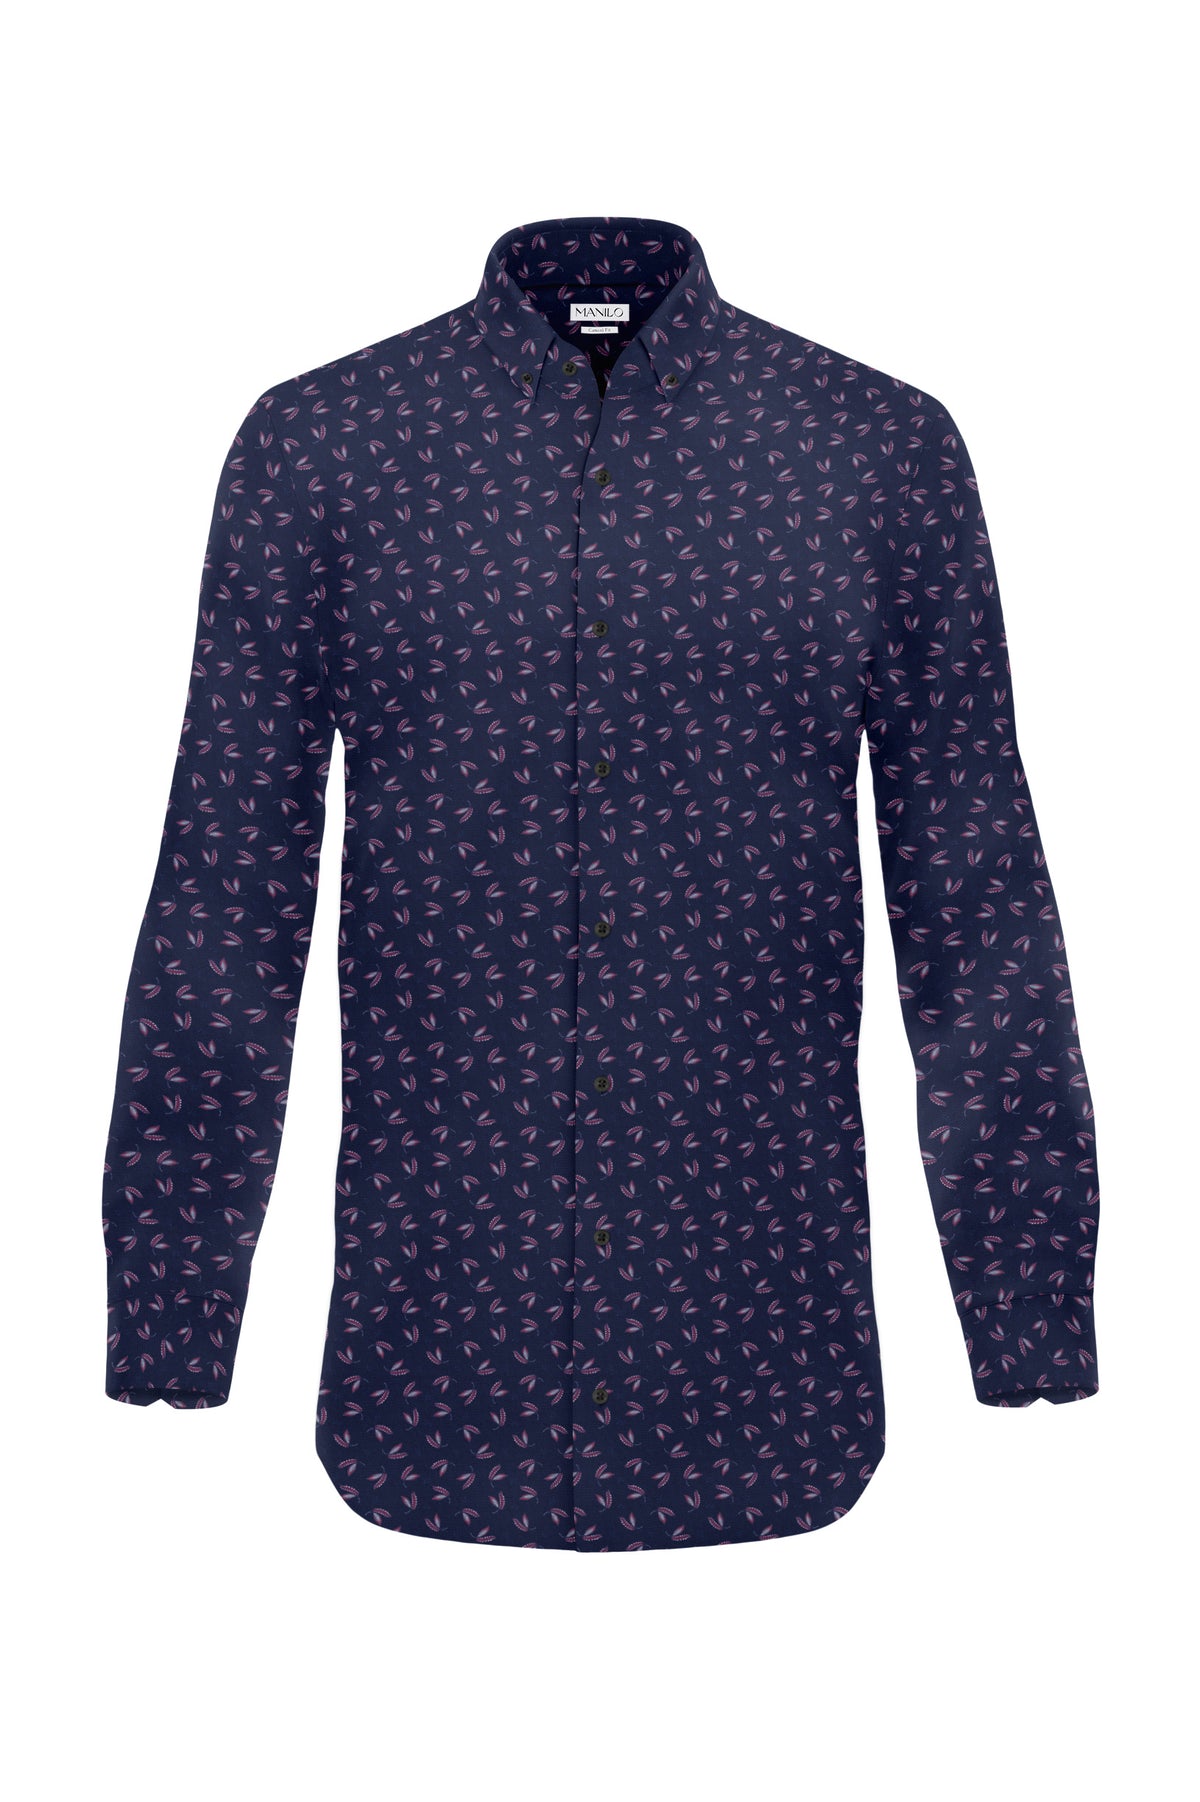 Navy/Red Printed Floral Pattern Casual Shirt (Art. 2103-C)